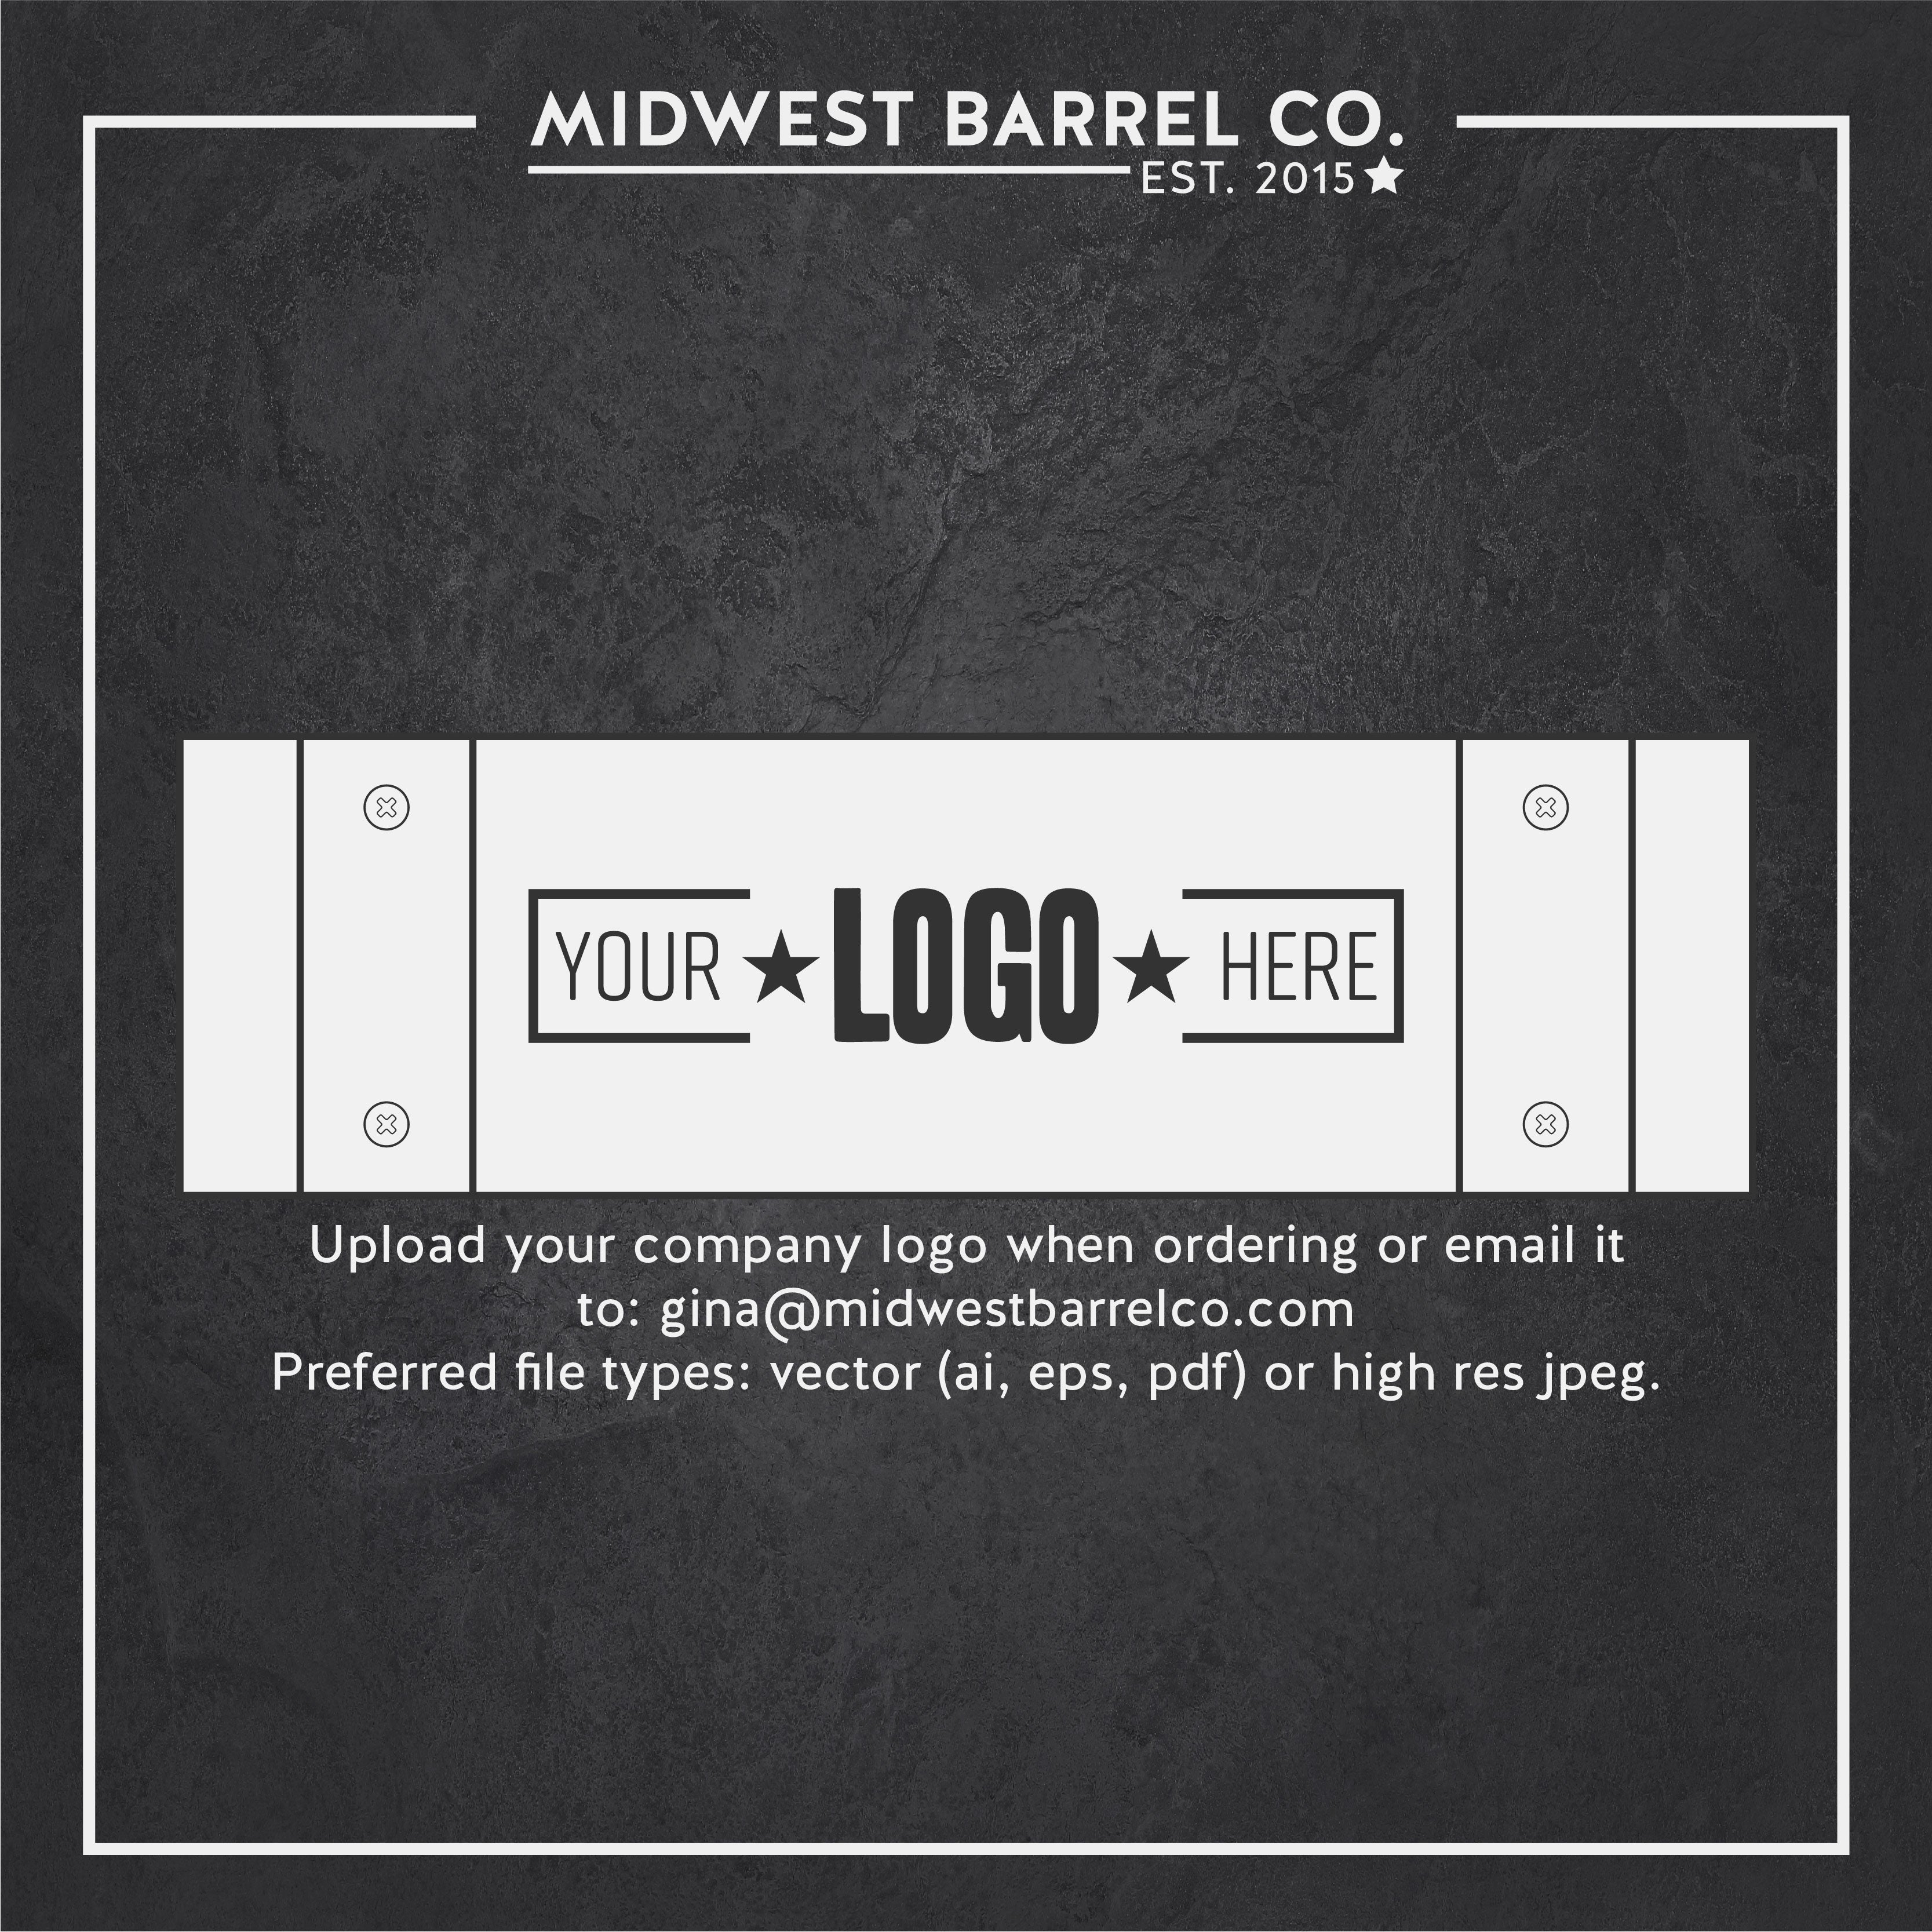 Example of a barrel stave and Your Logo Here text in the middle